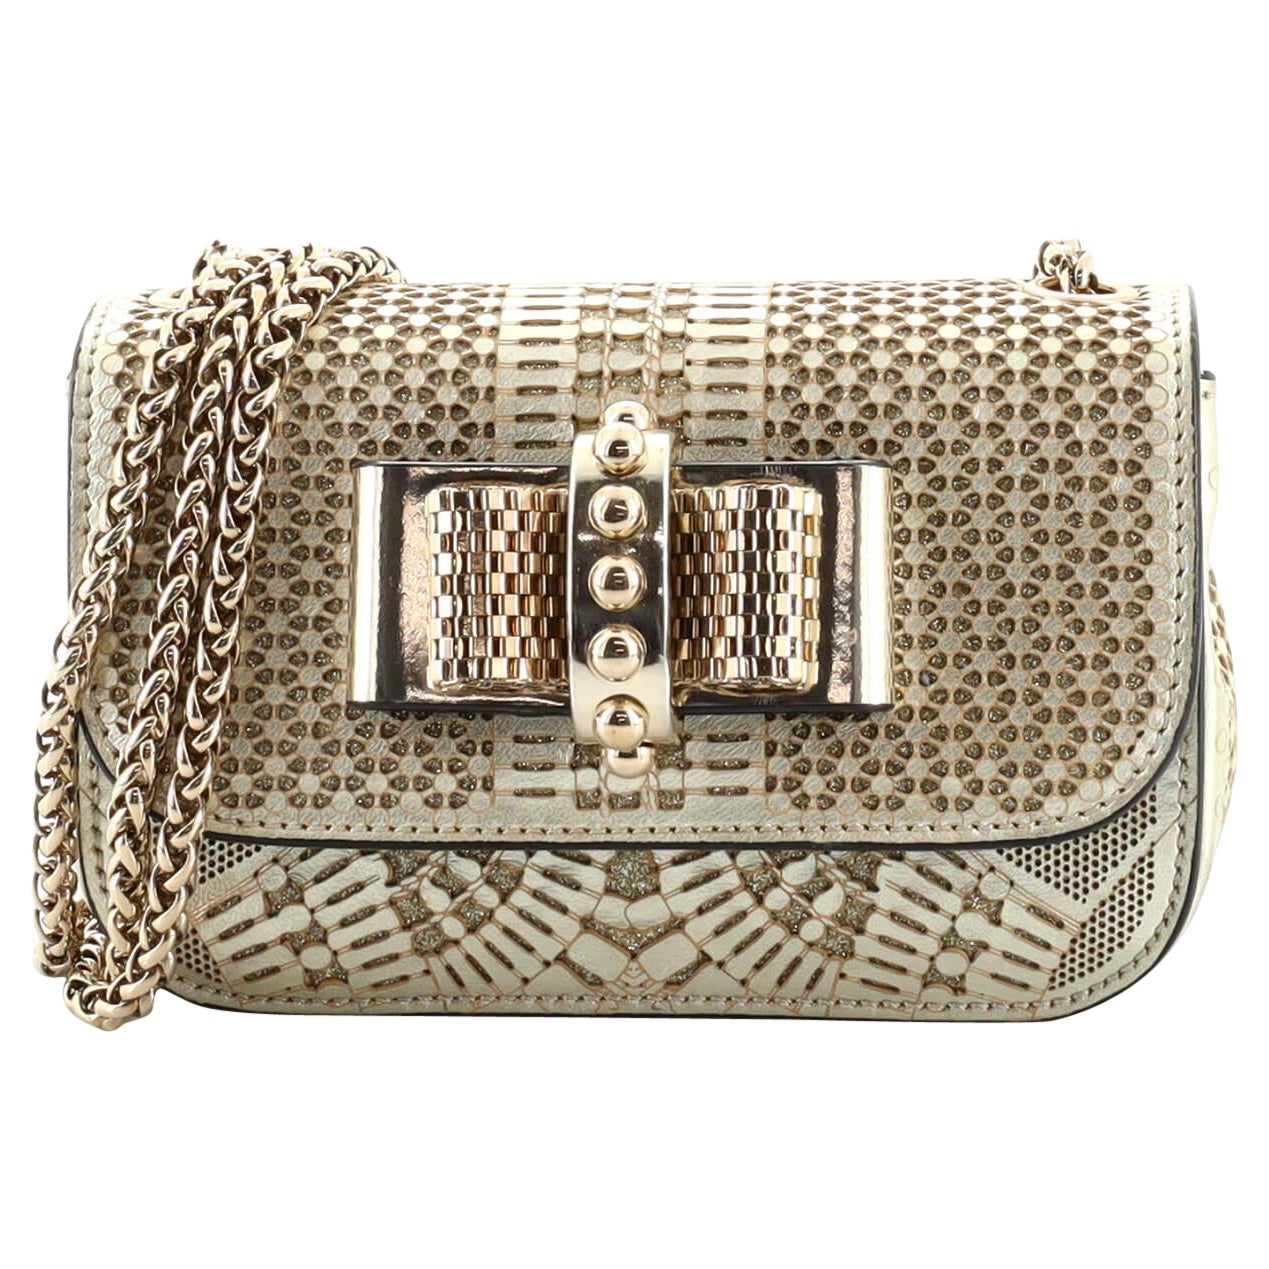 Christian Louboutin Sweet Charity Crossbody Bag Spiked Leather Mini at ...